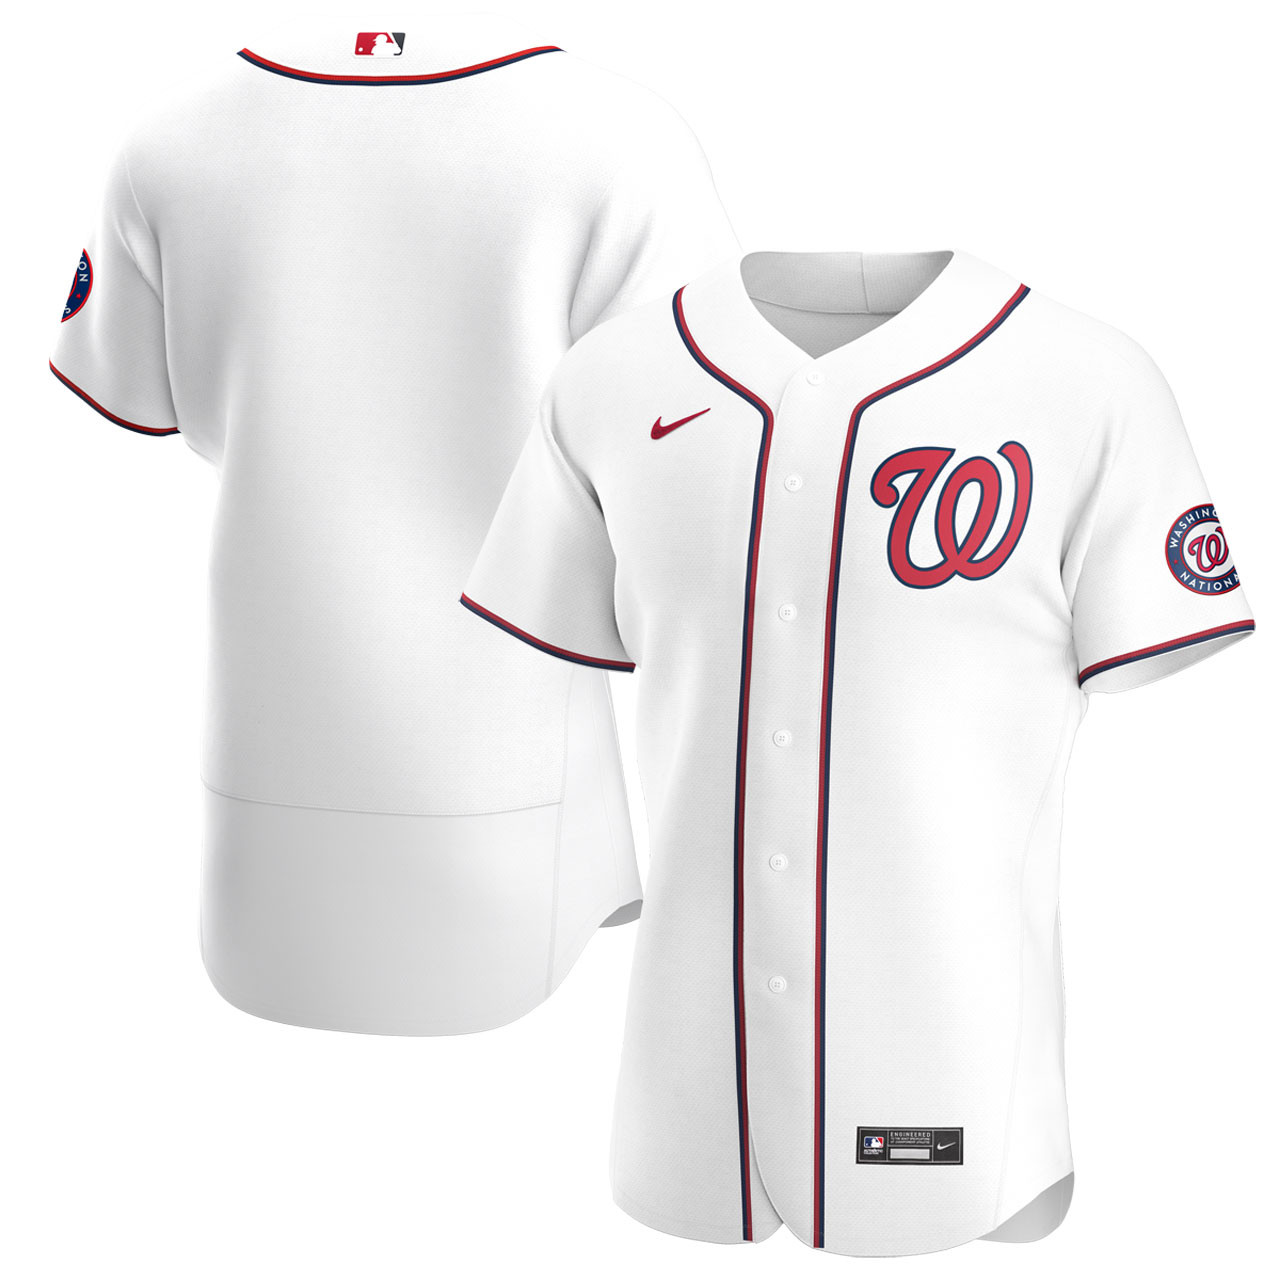 Washington Nationals White Home Authentic Jersey 3 by Nike